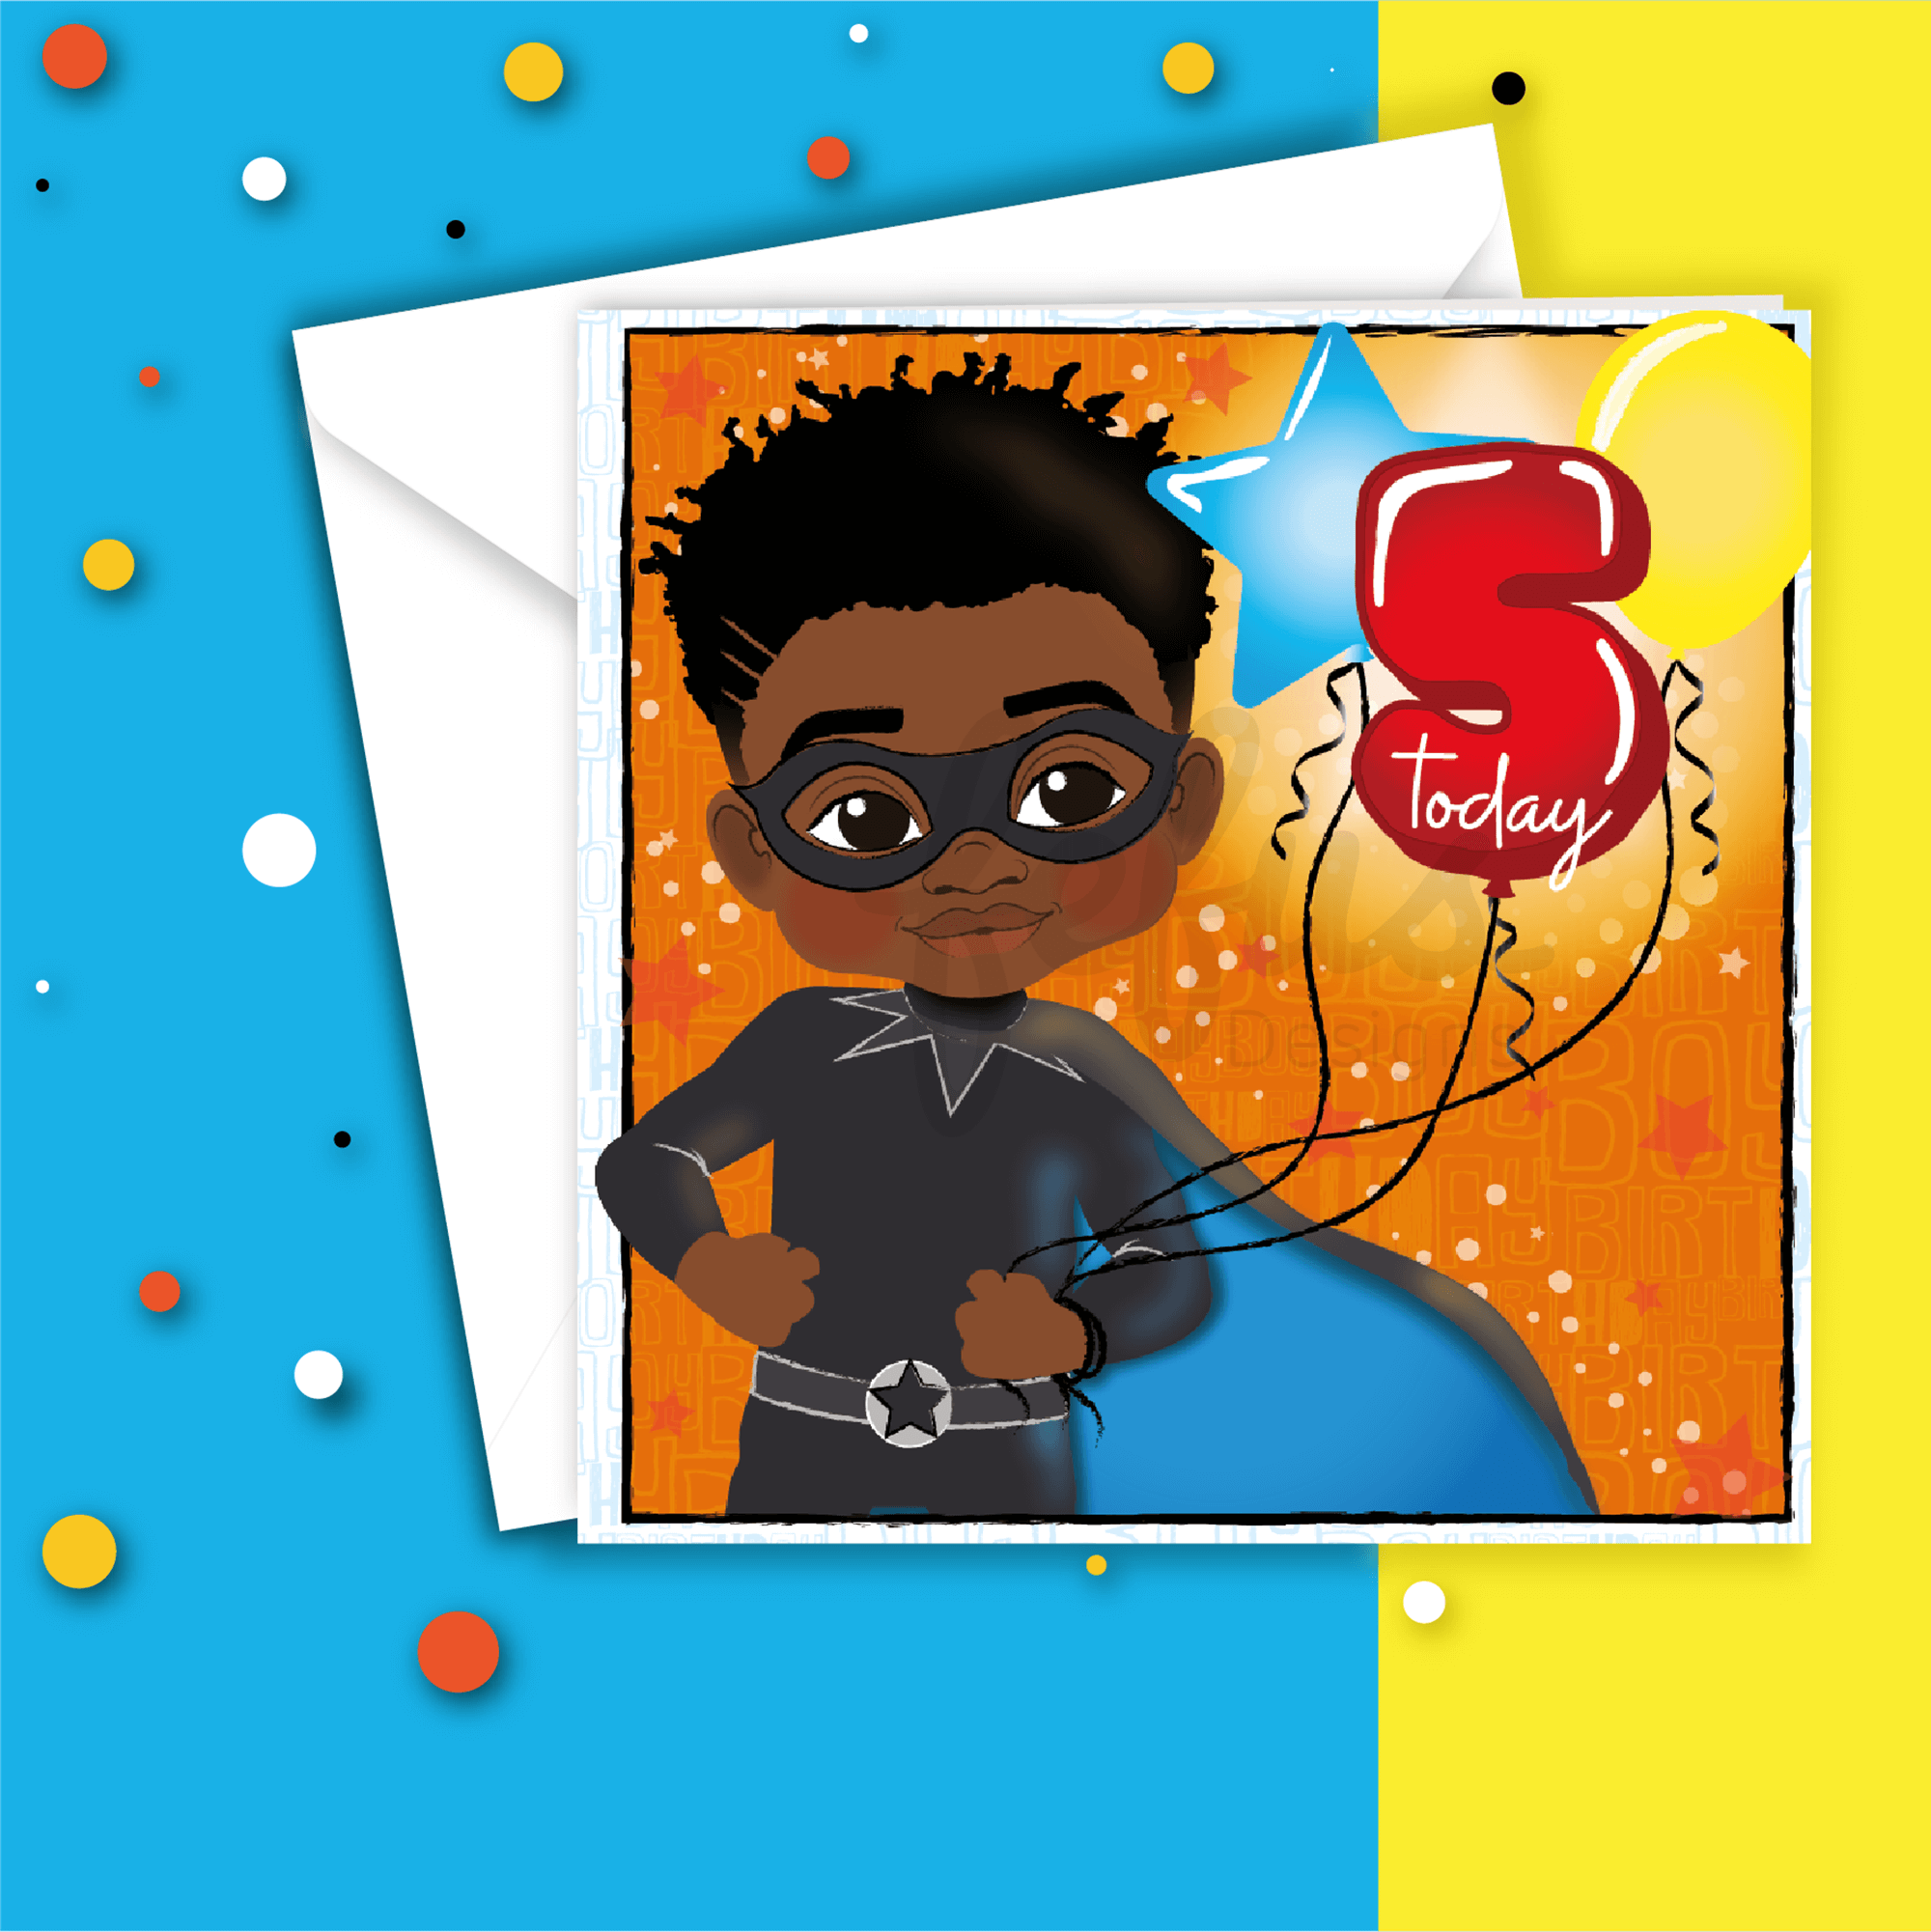 A birthday card for a Black boy celebrating his fifth birthday. The card features red number five balloons and yellow and blue balloons in the background.